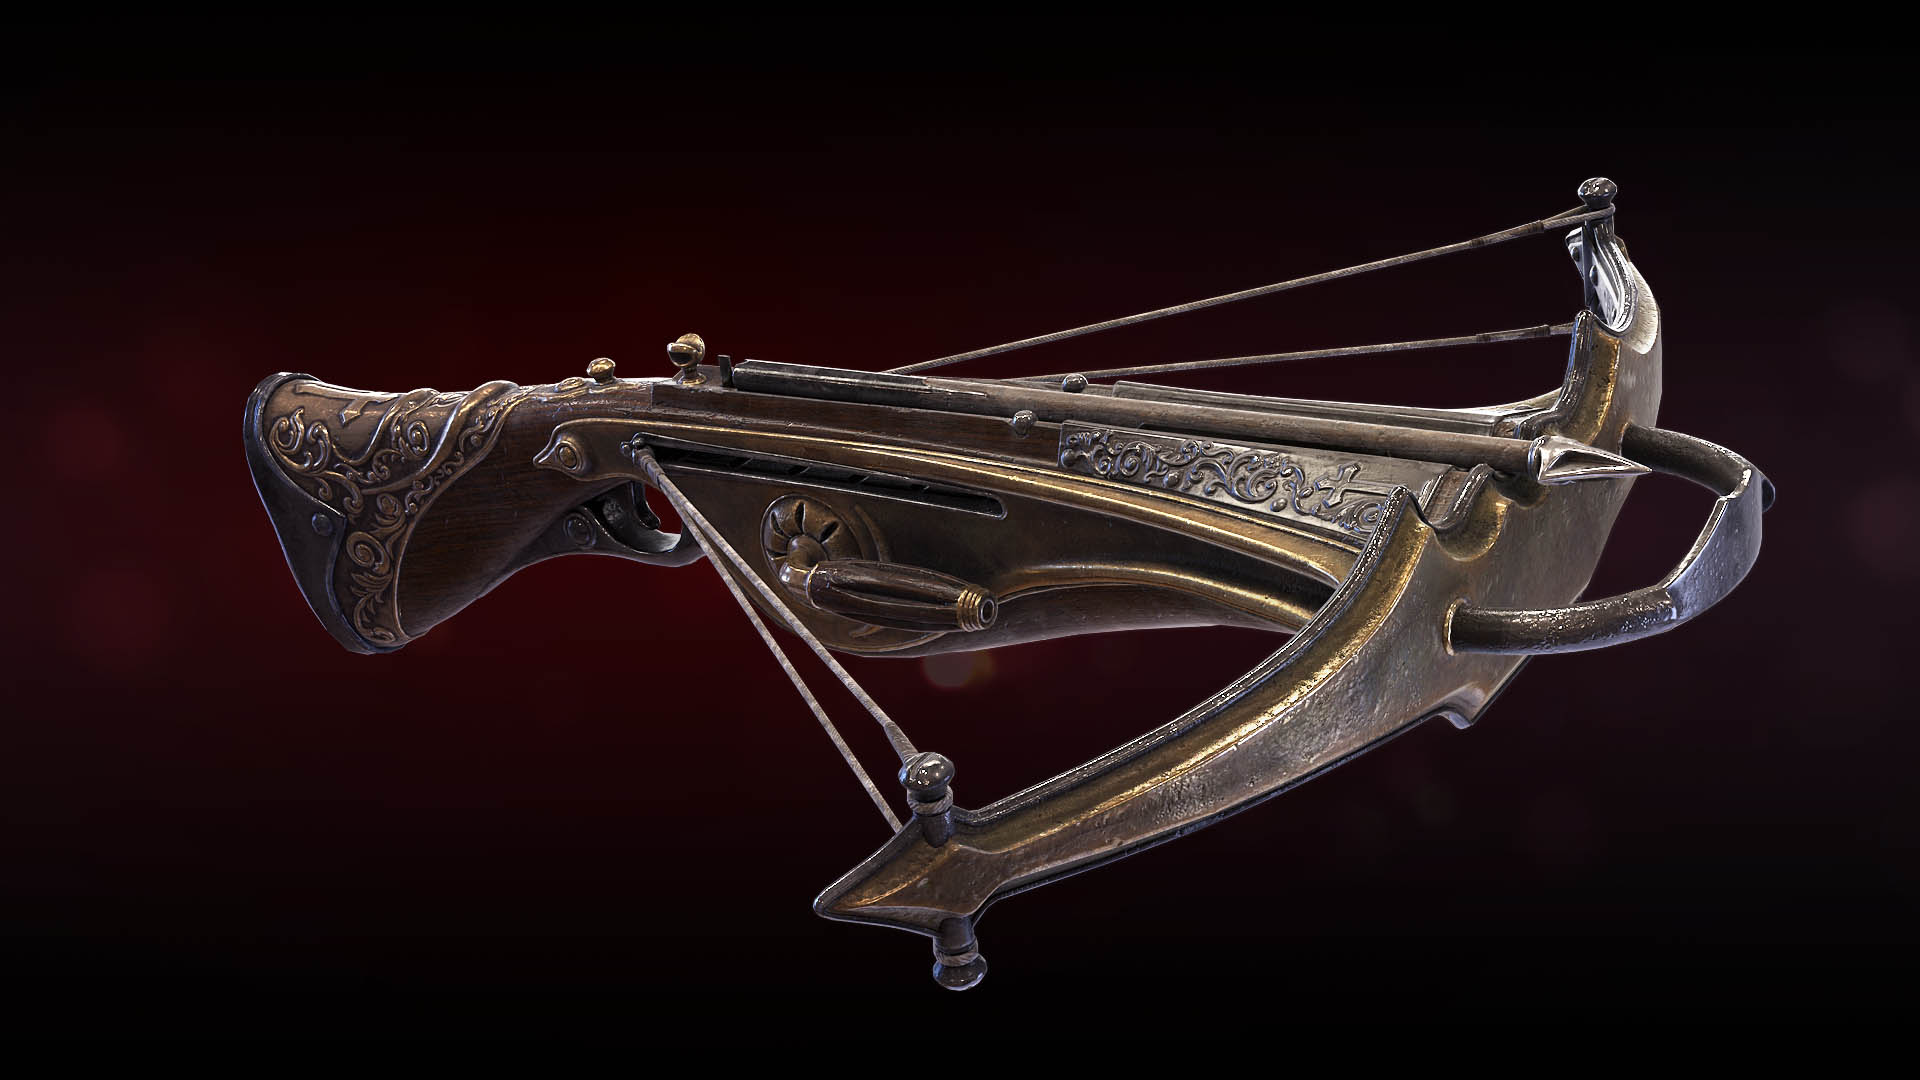 The Crossbow